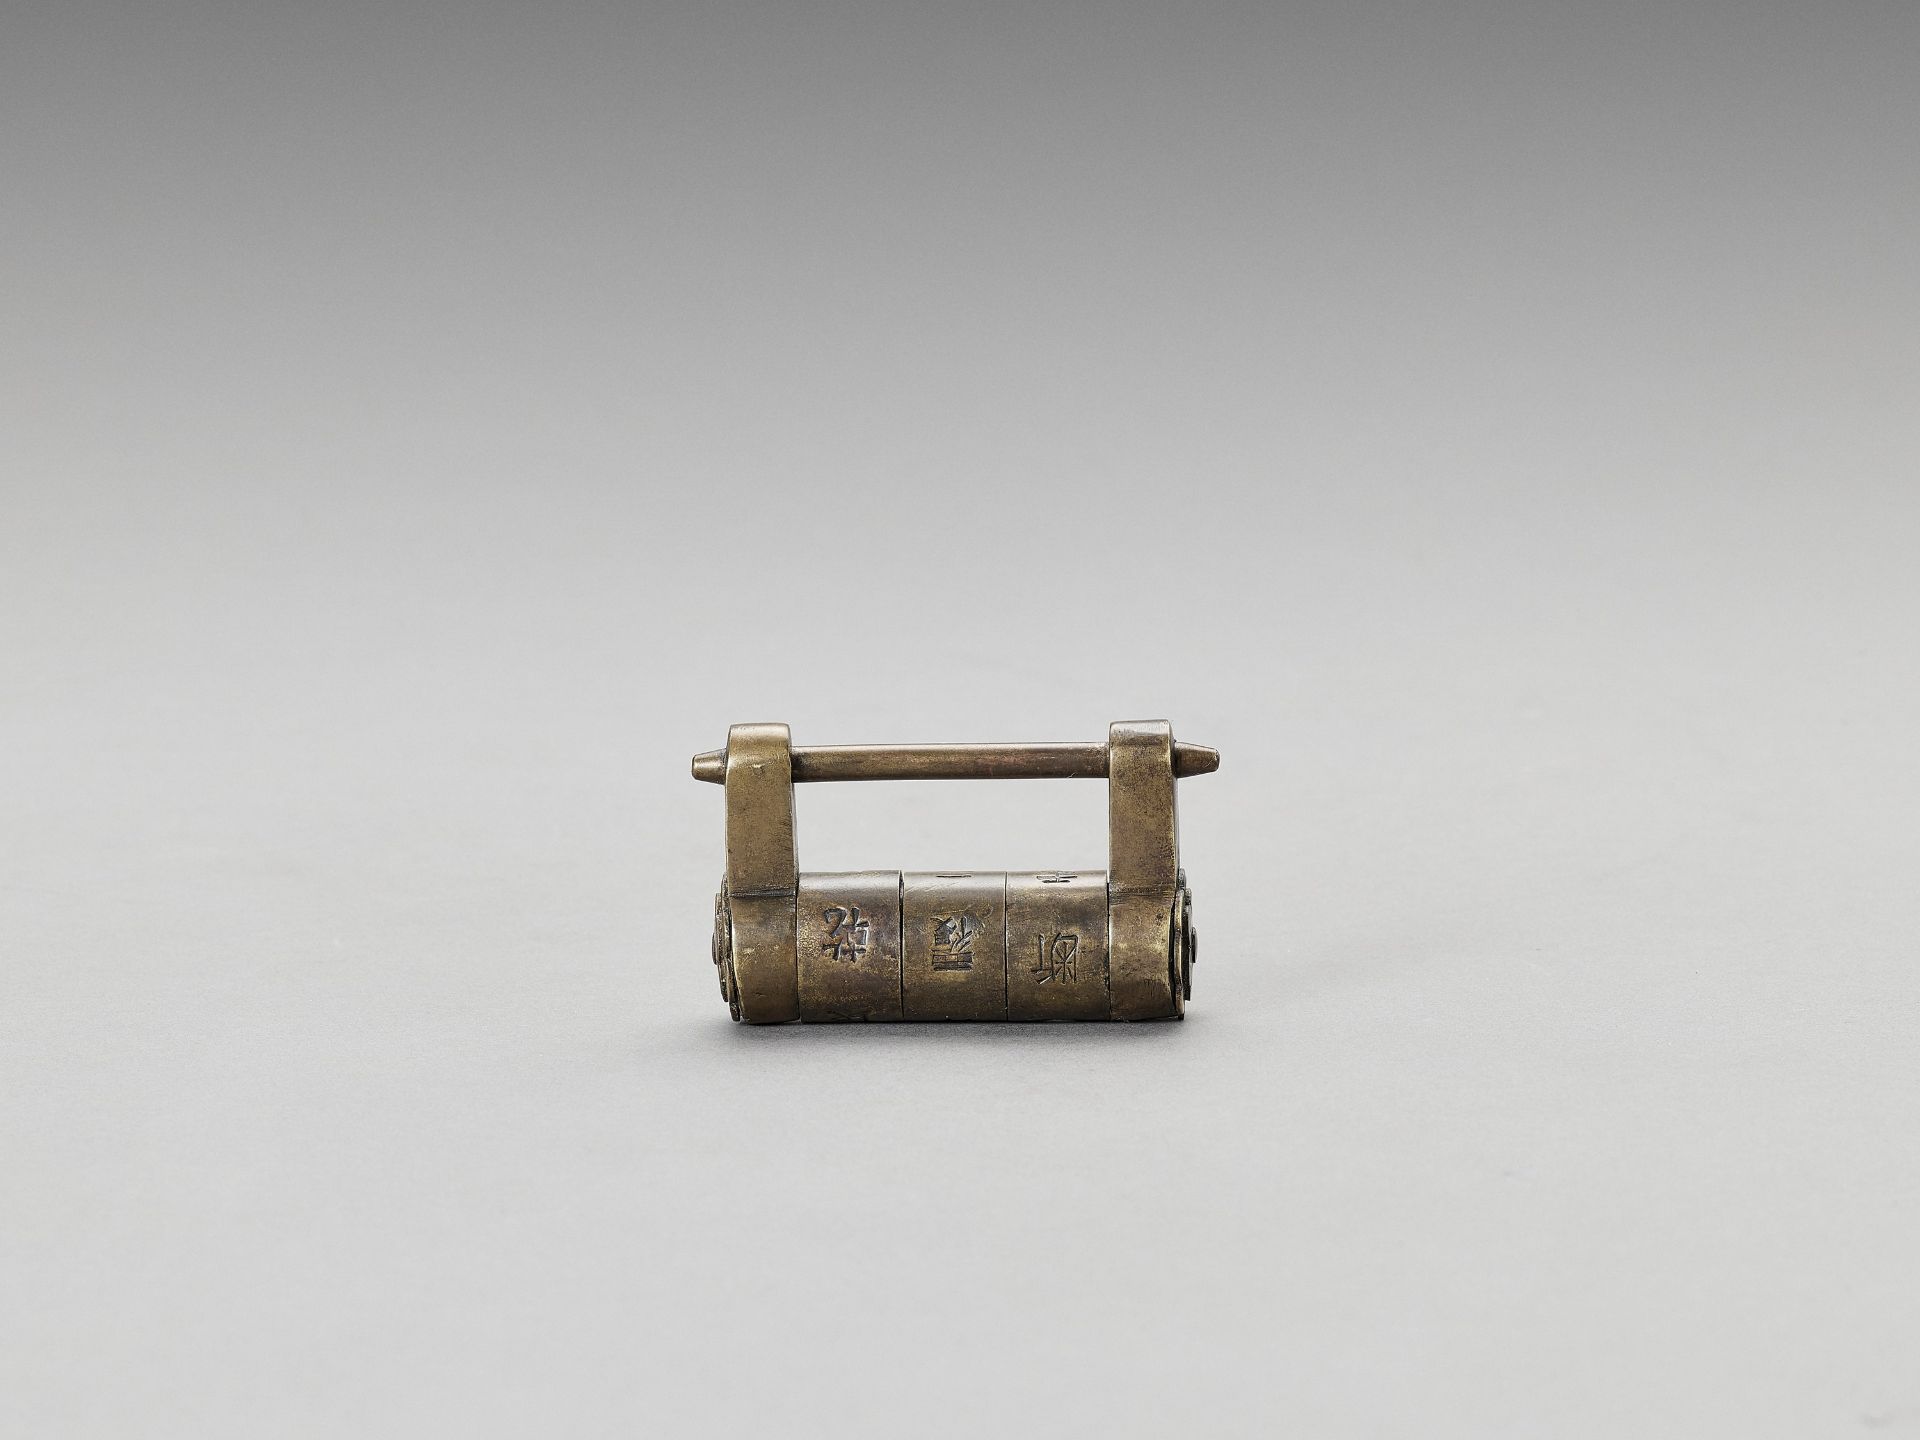 A FULLY FUNCTIONING CHINESE BRASS PADLOCK - Image 4 of 6